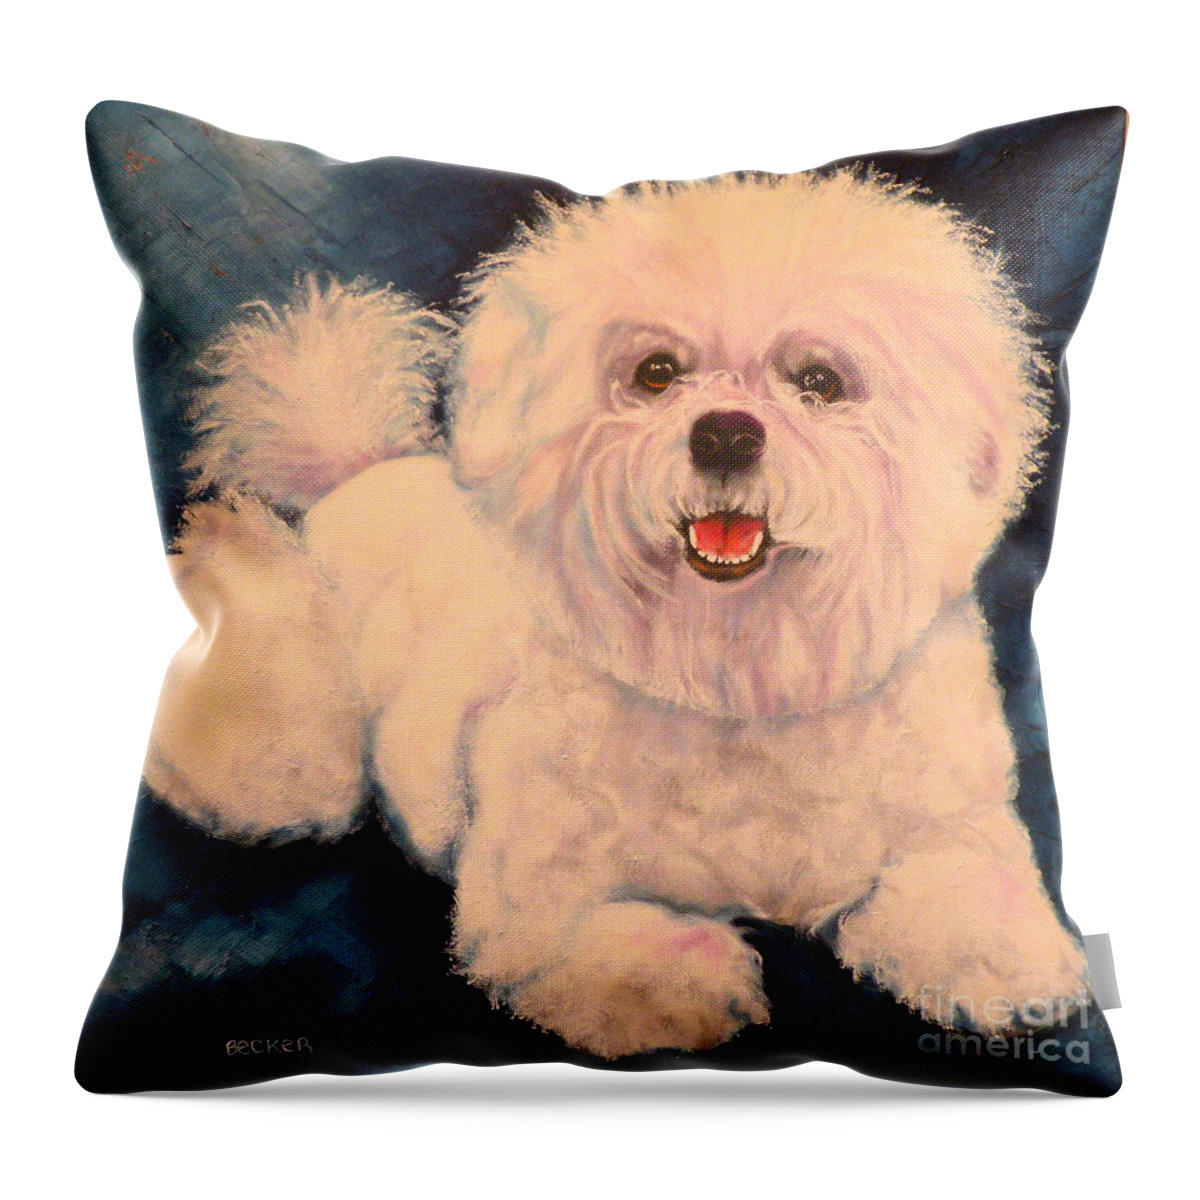 Bichon Frise Throw Pillow featuring the painting Bichon Frise by Susan A Becker